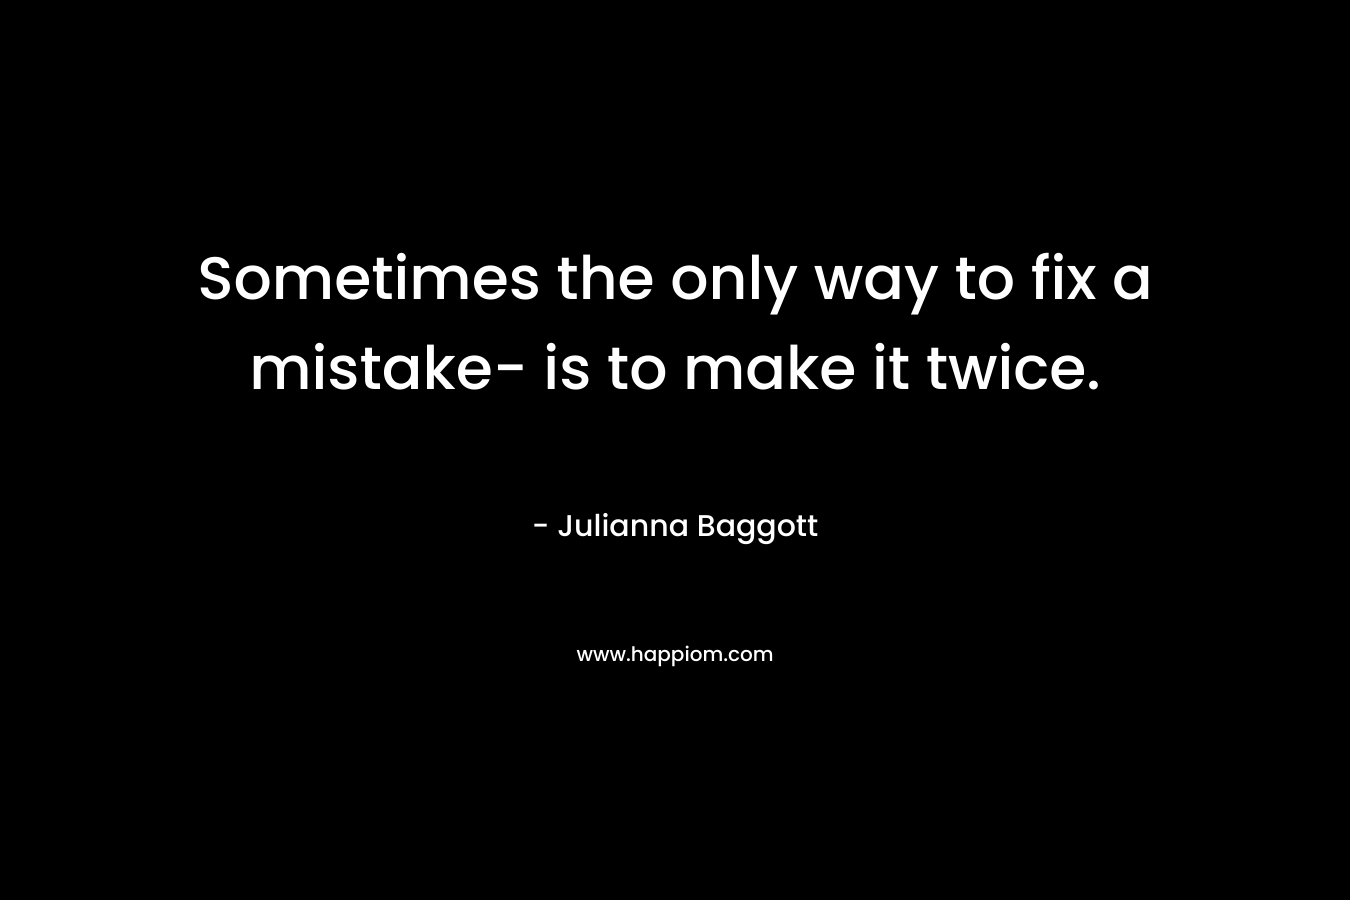 Sometimes the only way to fix a mistake- is to make it twice. – Julianna Baggott